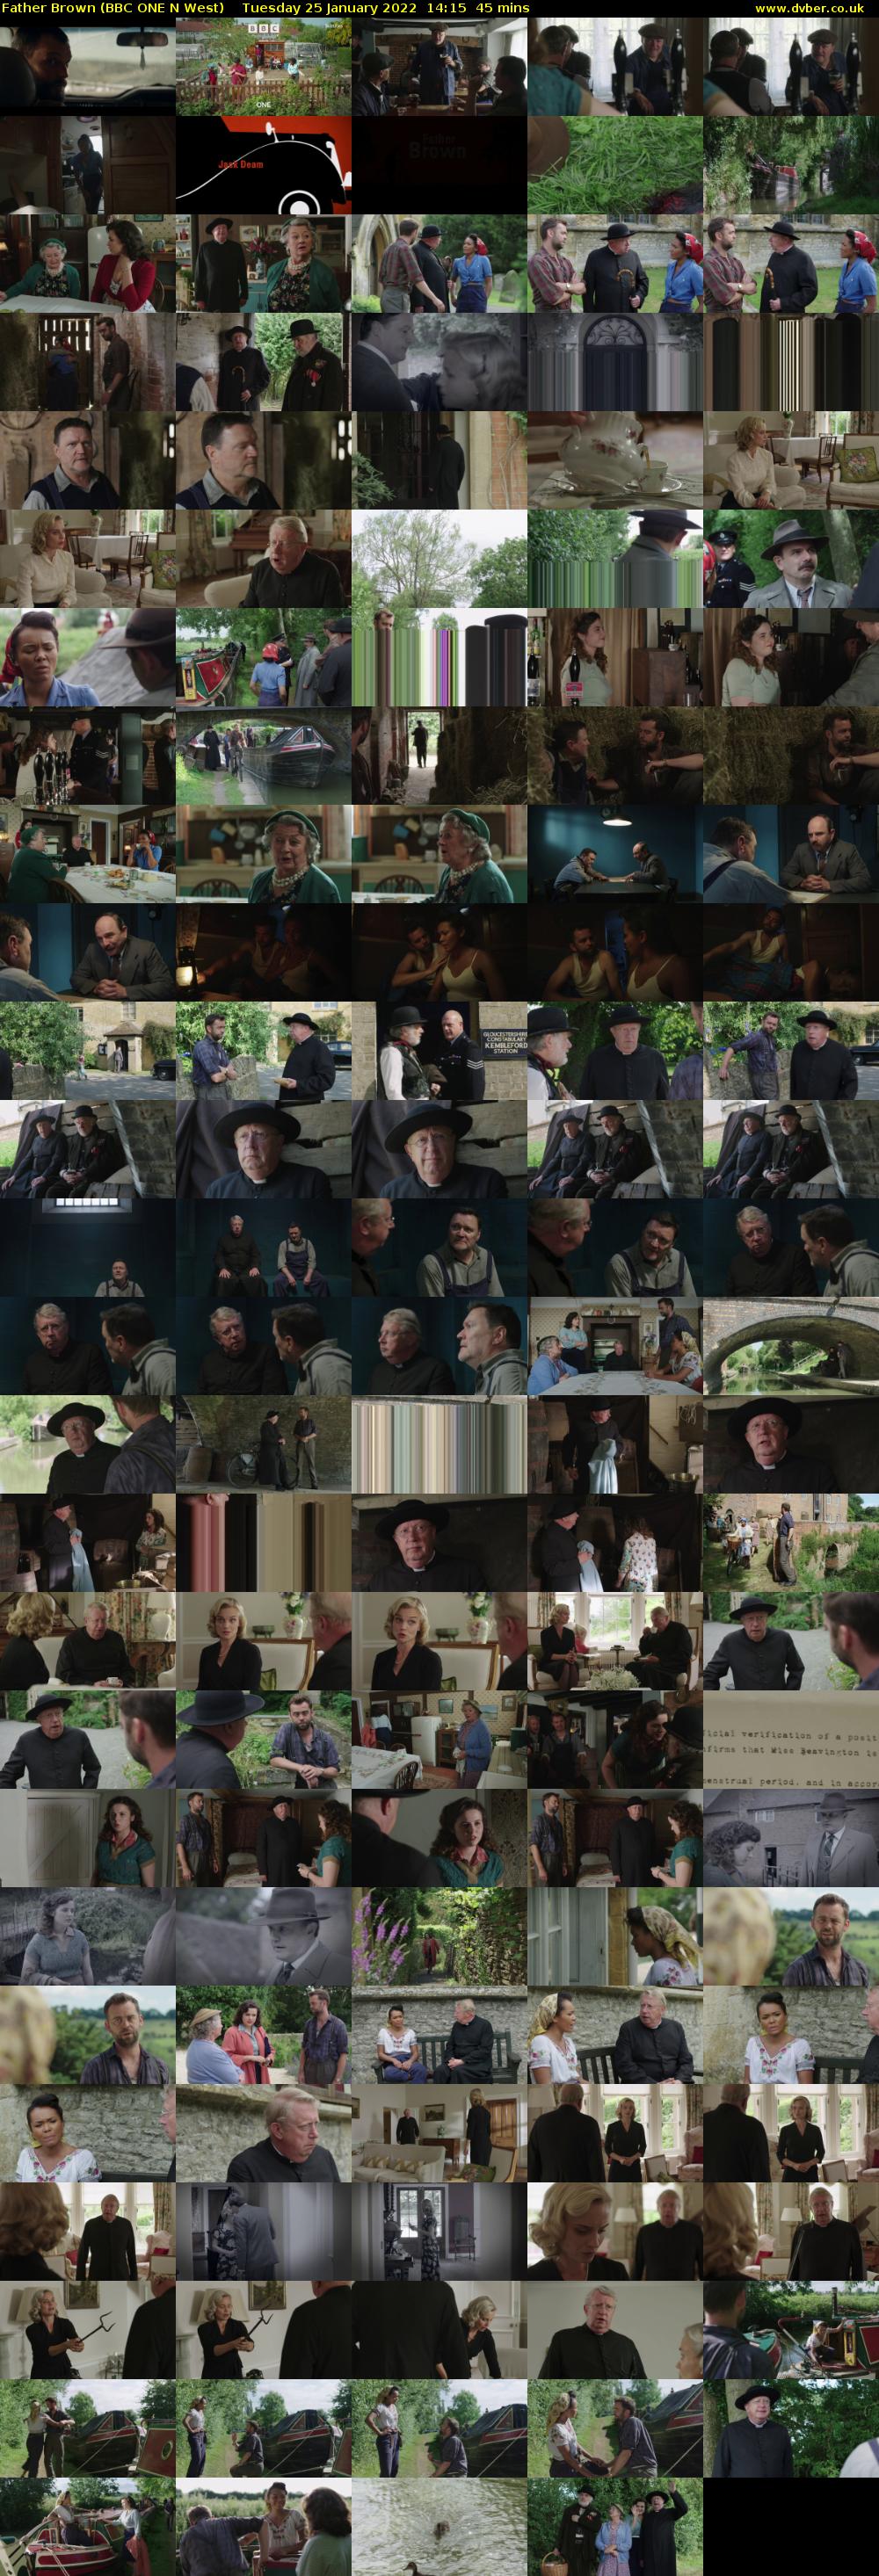 Father Brown (BBC ONE N West) Tuesday 25 January 2022 14:15 - 15:00